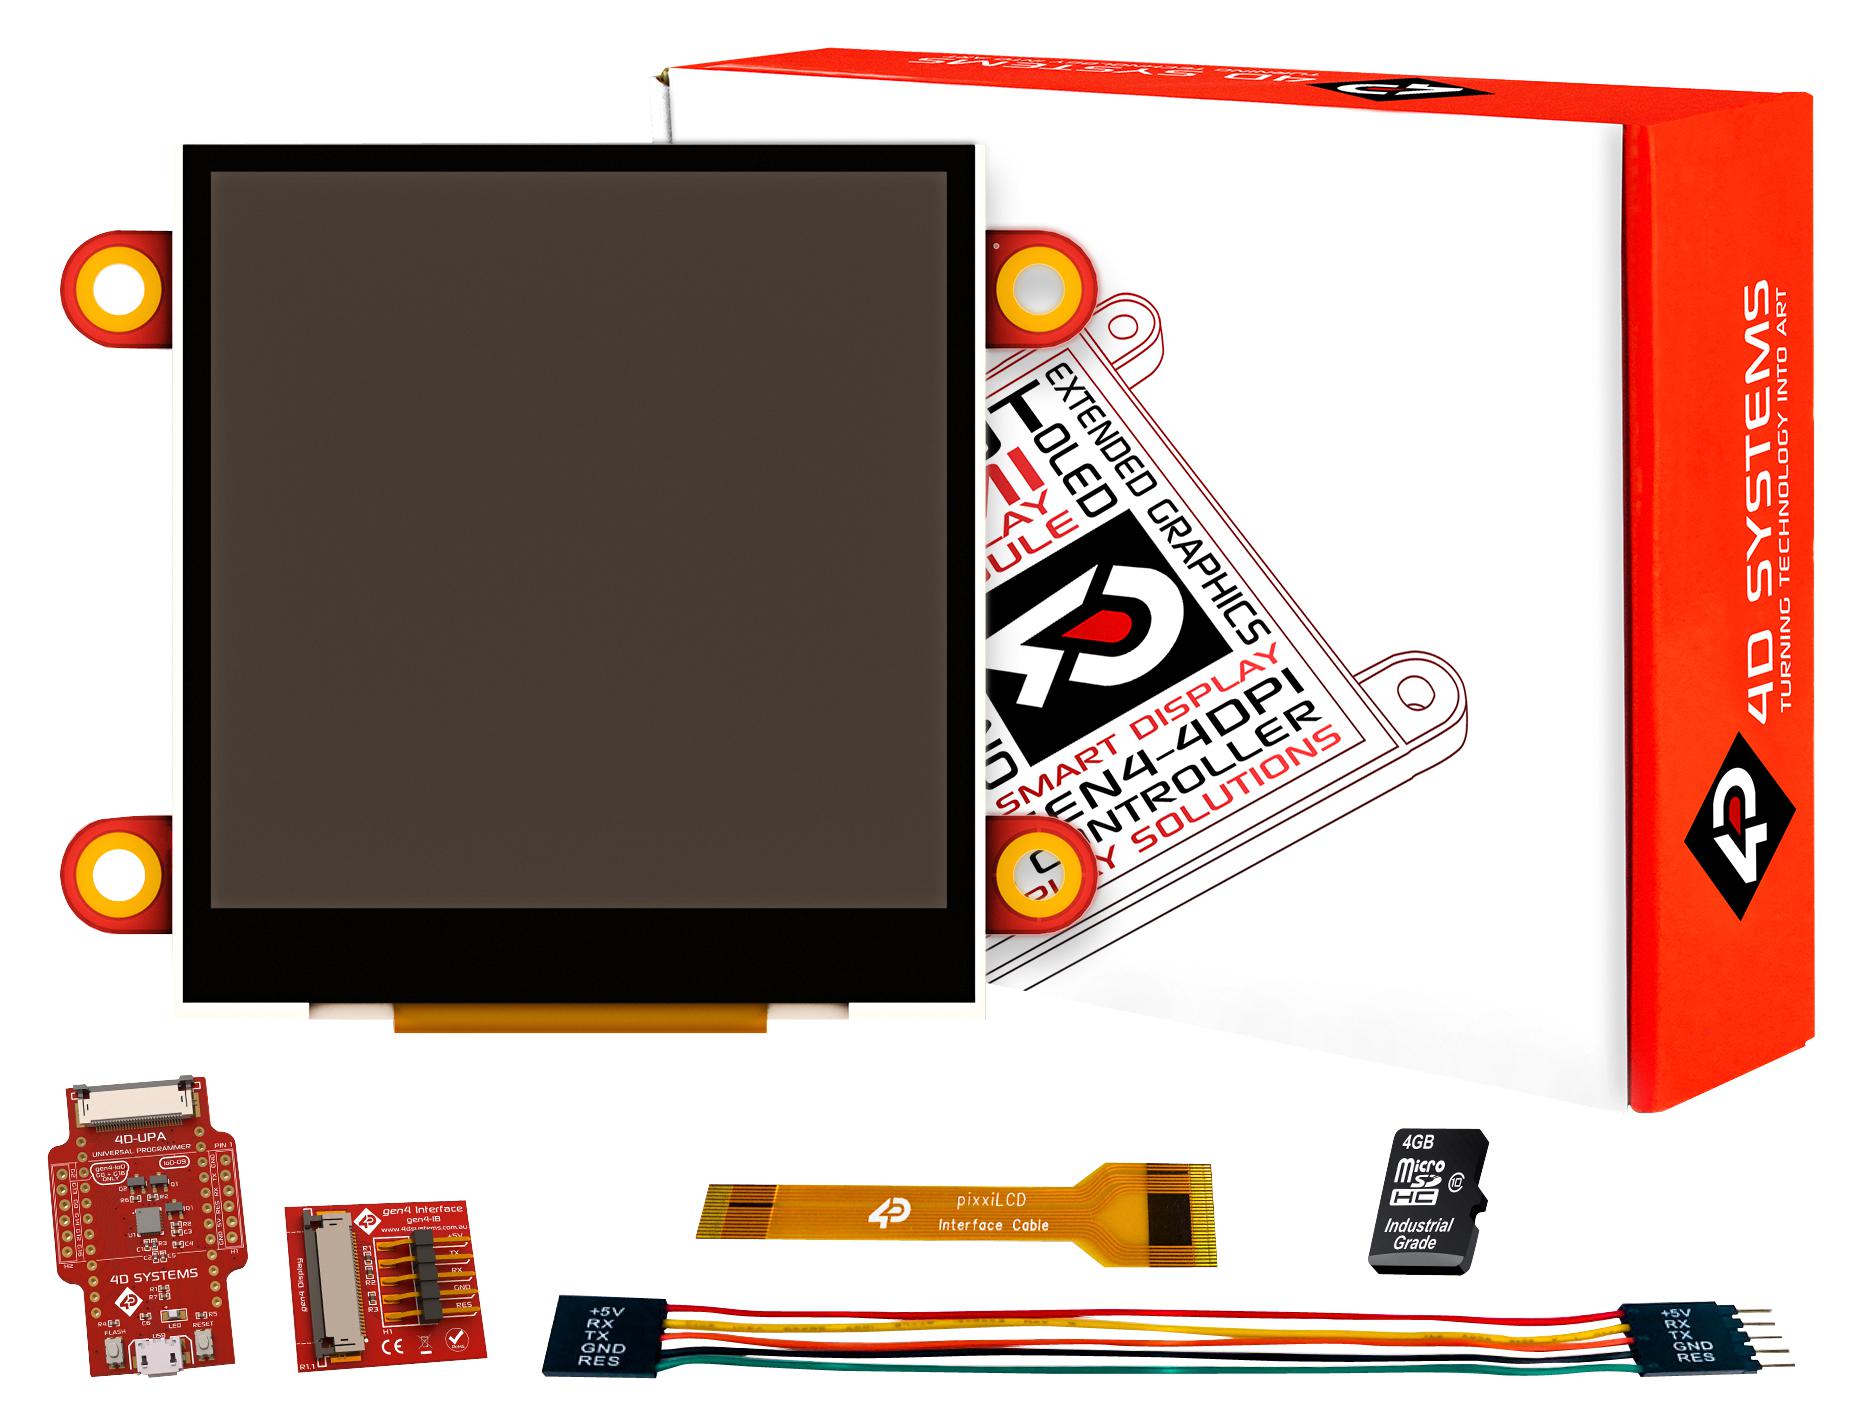 SK-PIXXILCD-25P4 STARTER KIT, 2.5" GRAPHIC DISPLAY 4D SYSTEMS